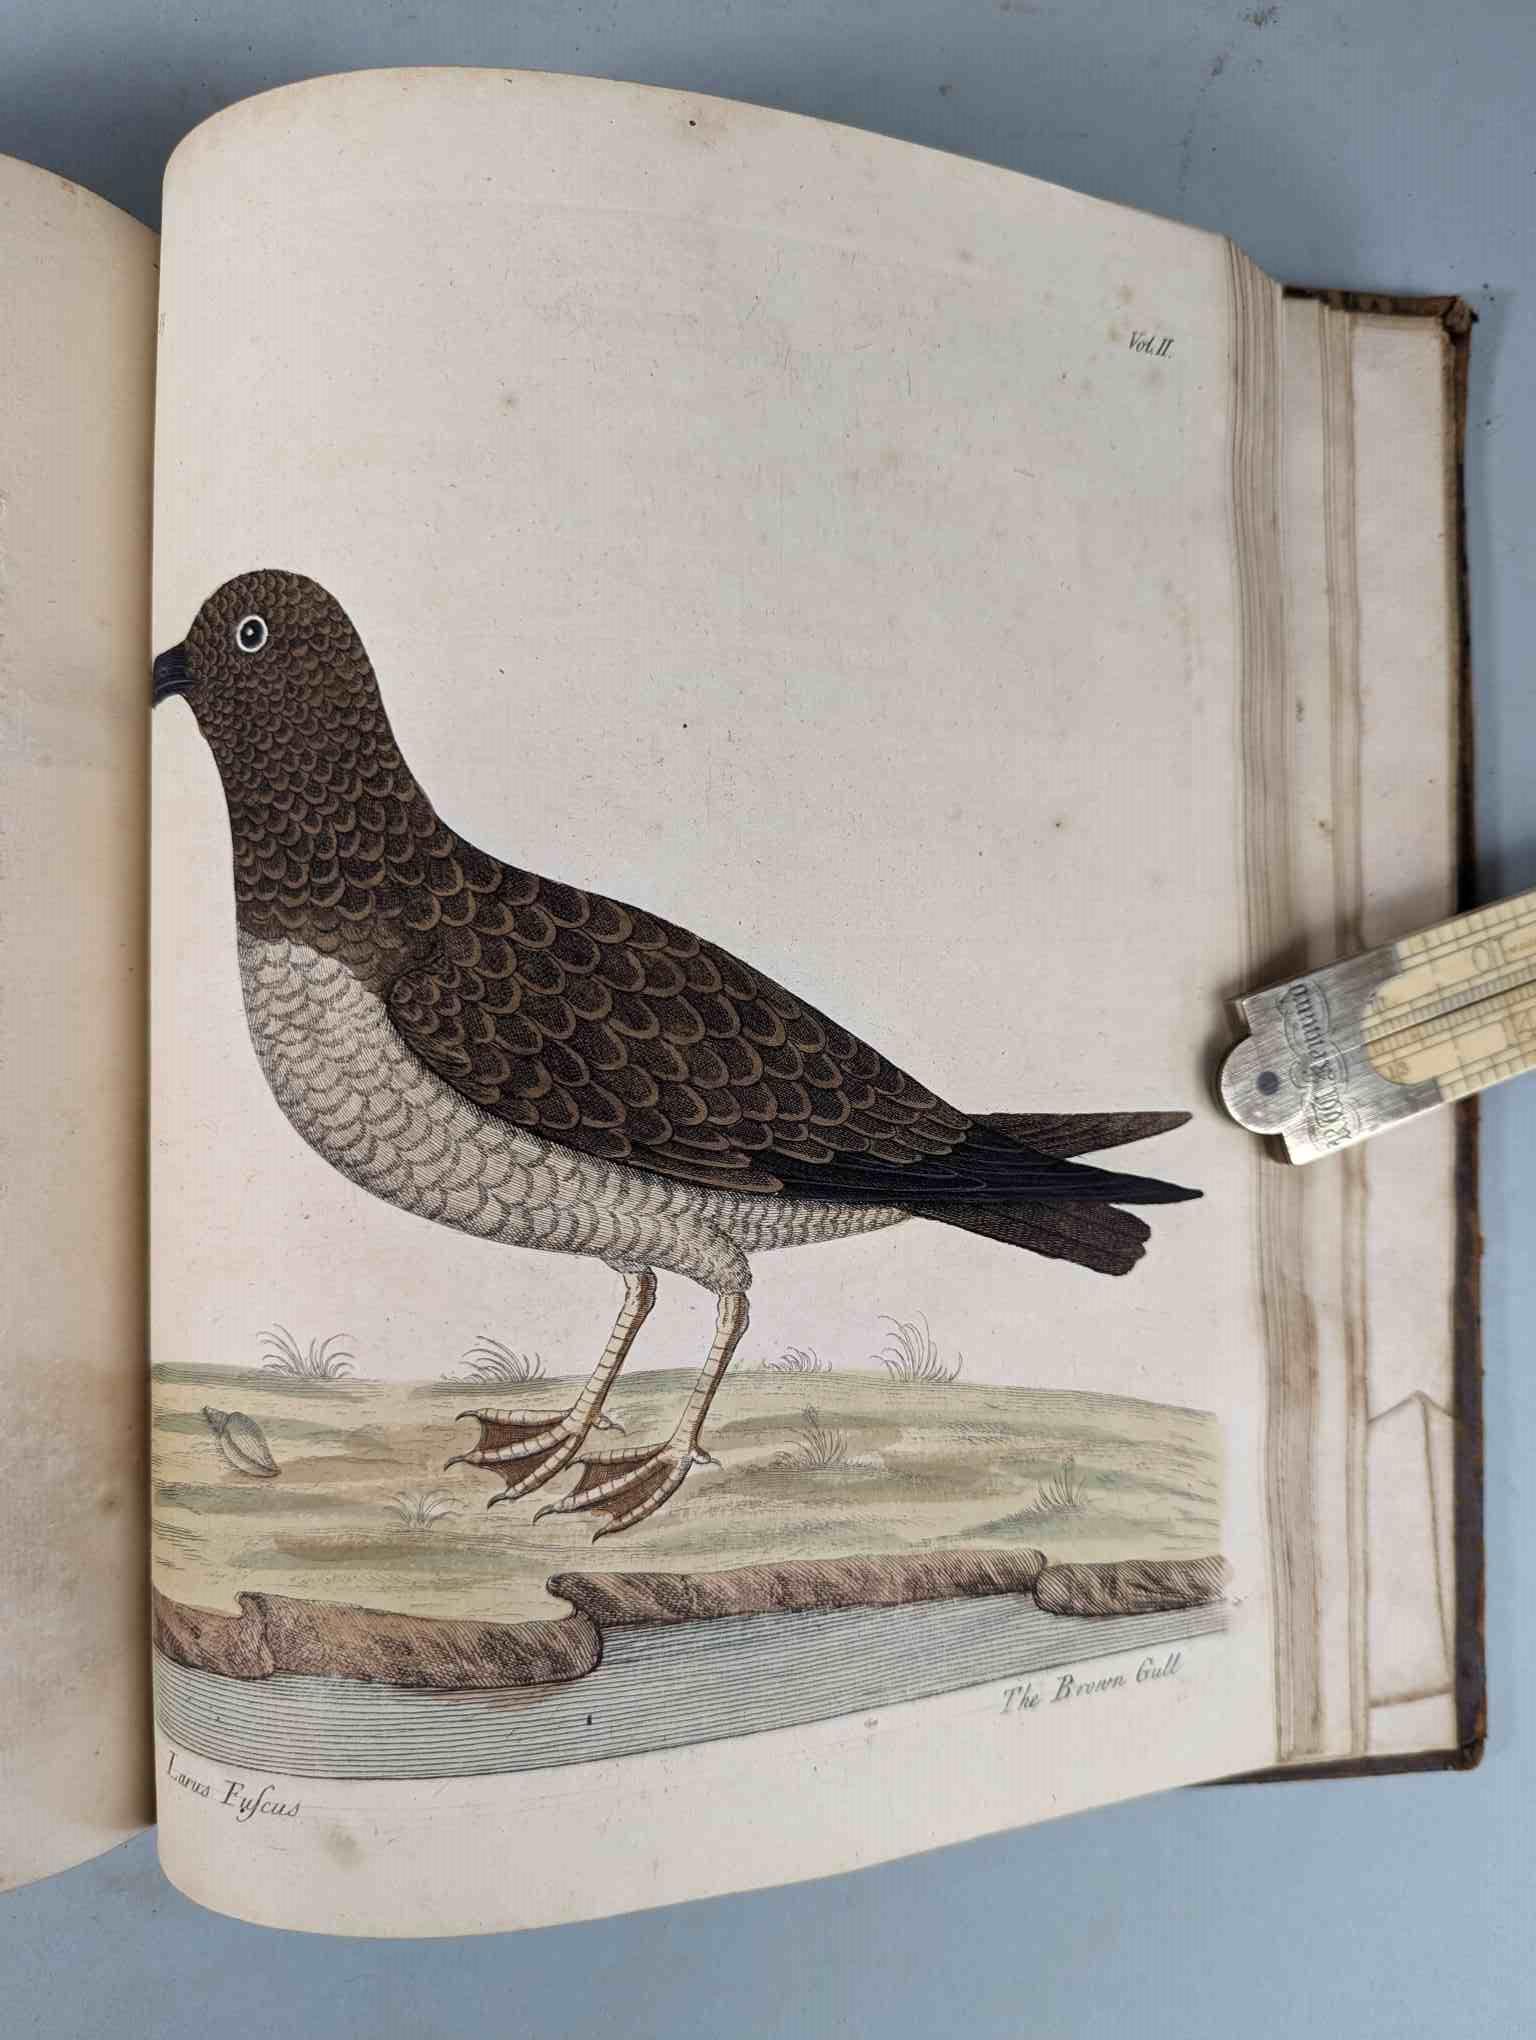 ALBIN, Eleazar. A Natural History of Birds, to which are added, Notes and Observations by W. - Image 189 of 208